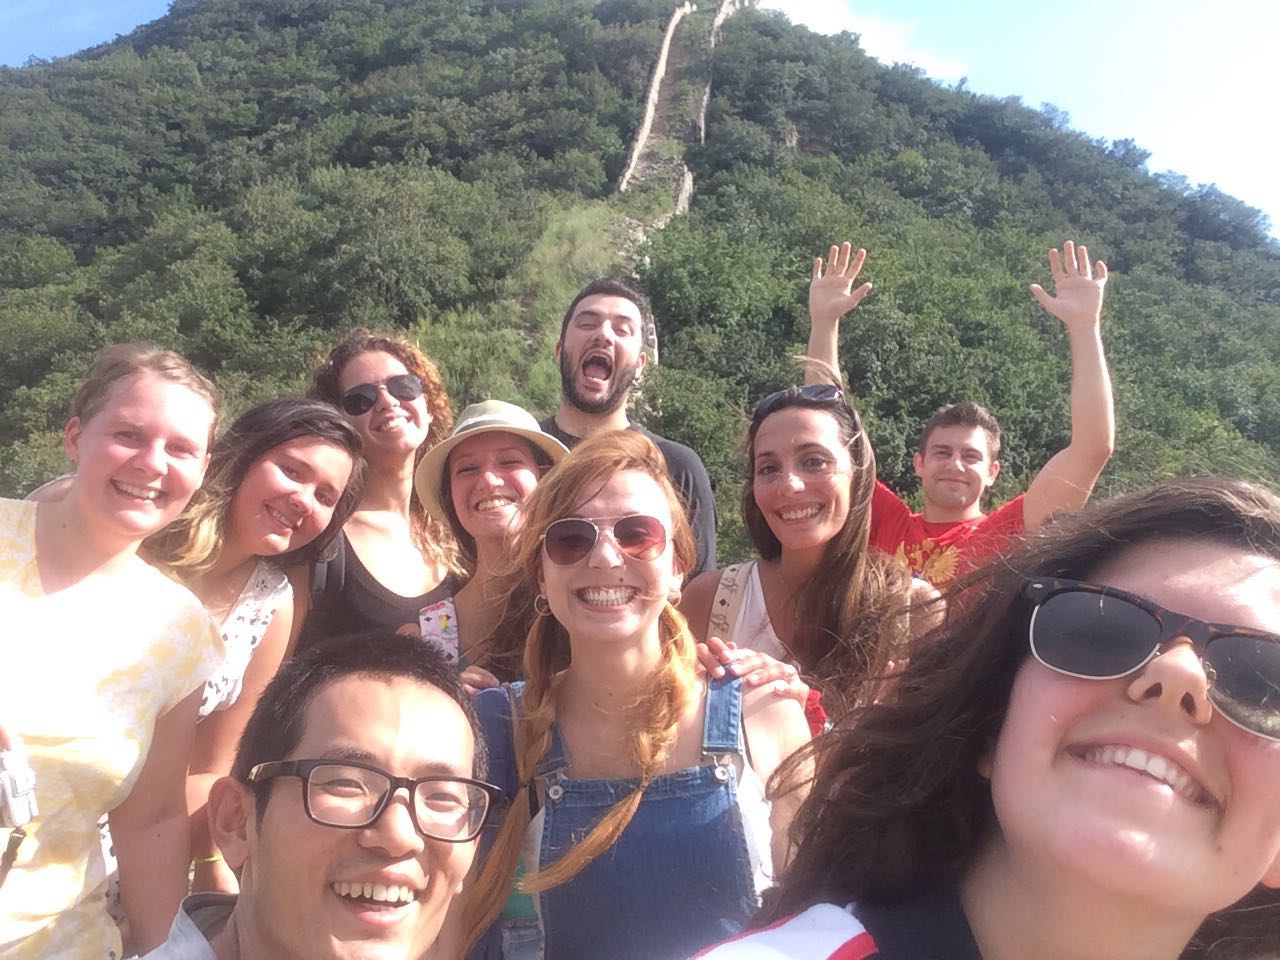 Time for a selfie on the Great Wall